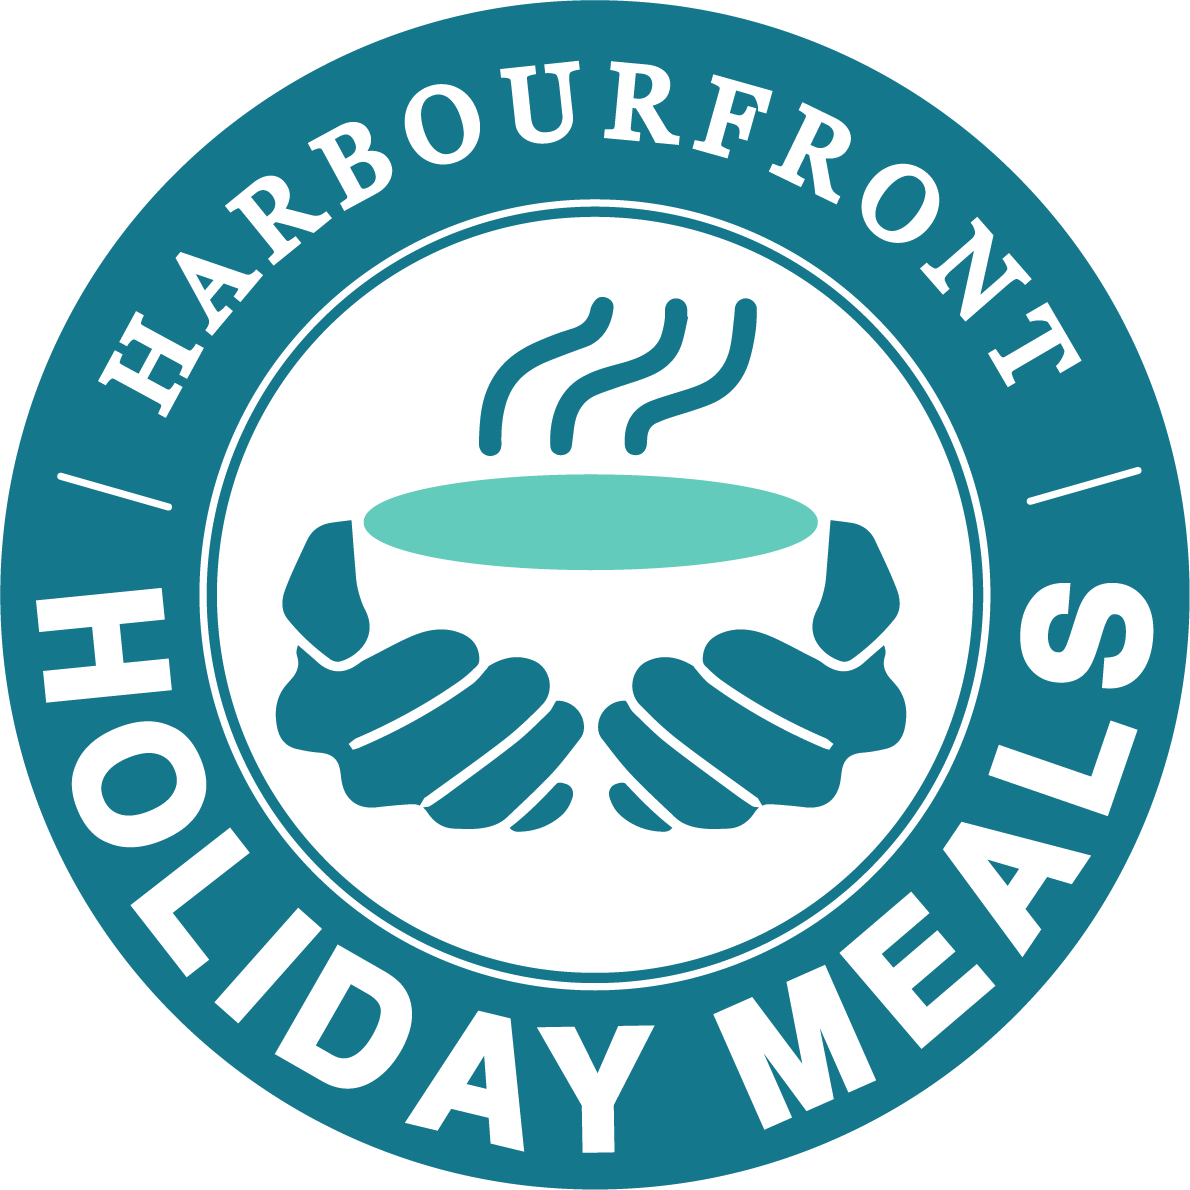 Harbourfront Gives Foundation logo